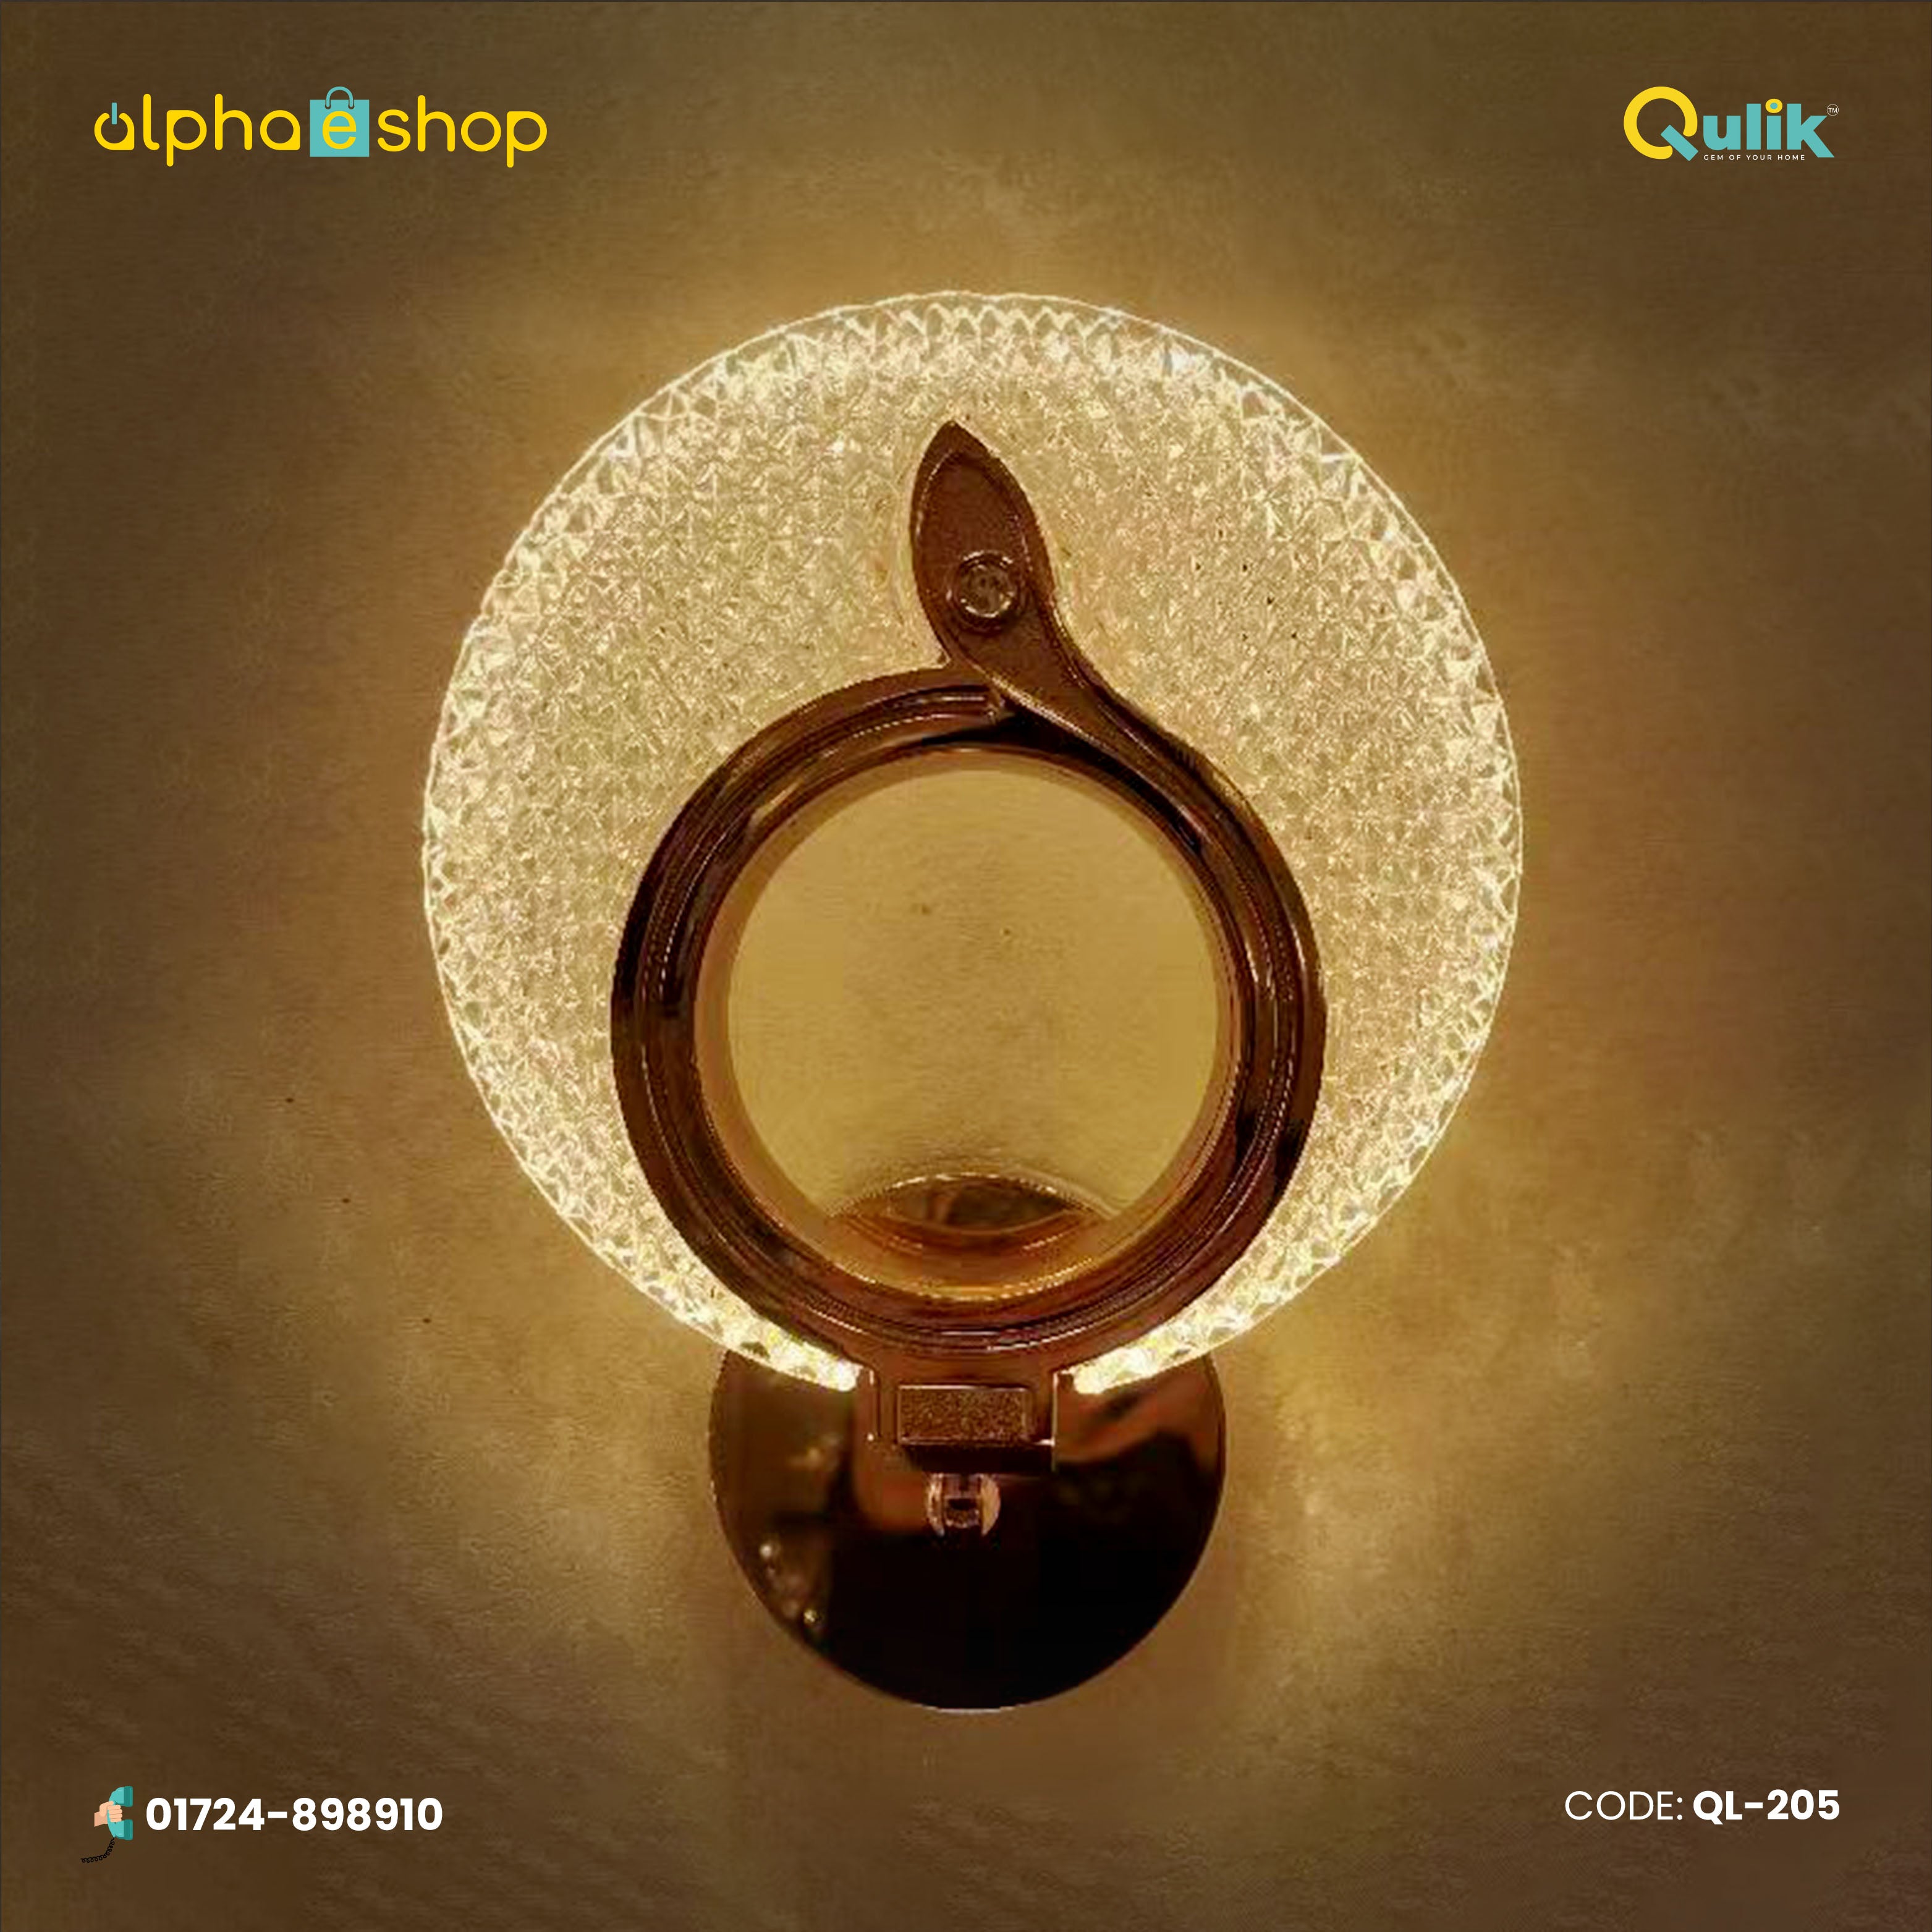 Qulik QL-205 Modern Wall Lamp - Timeless Elegance, Aluminum Body, Adjustable Lighting, 2-Year Warranty. Elevate your space with sophistication and enduring style.